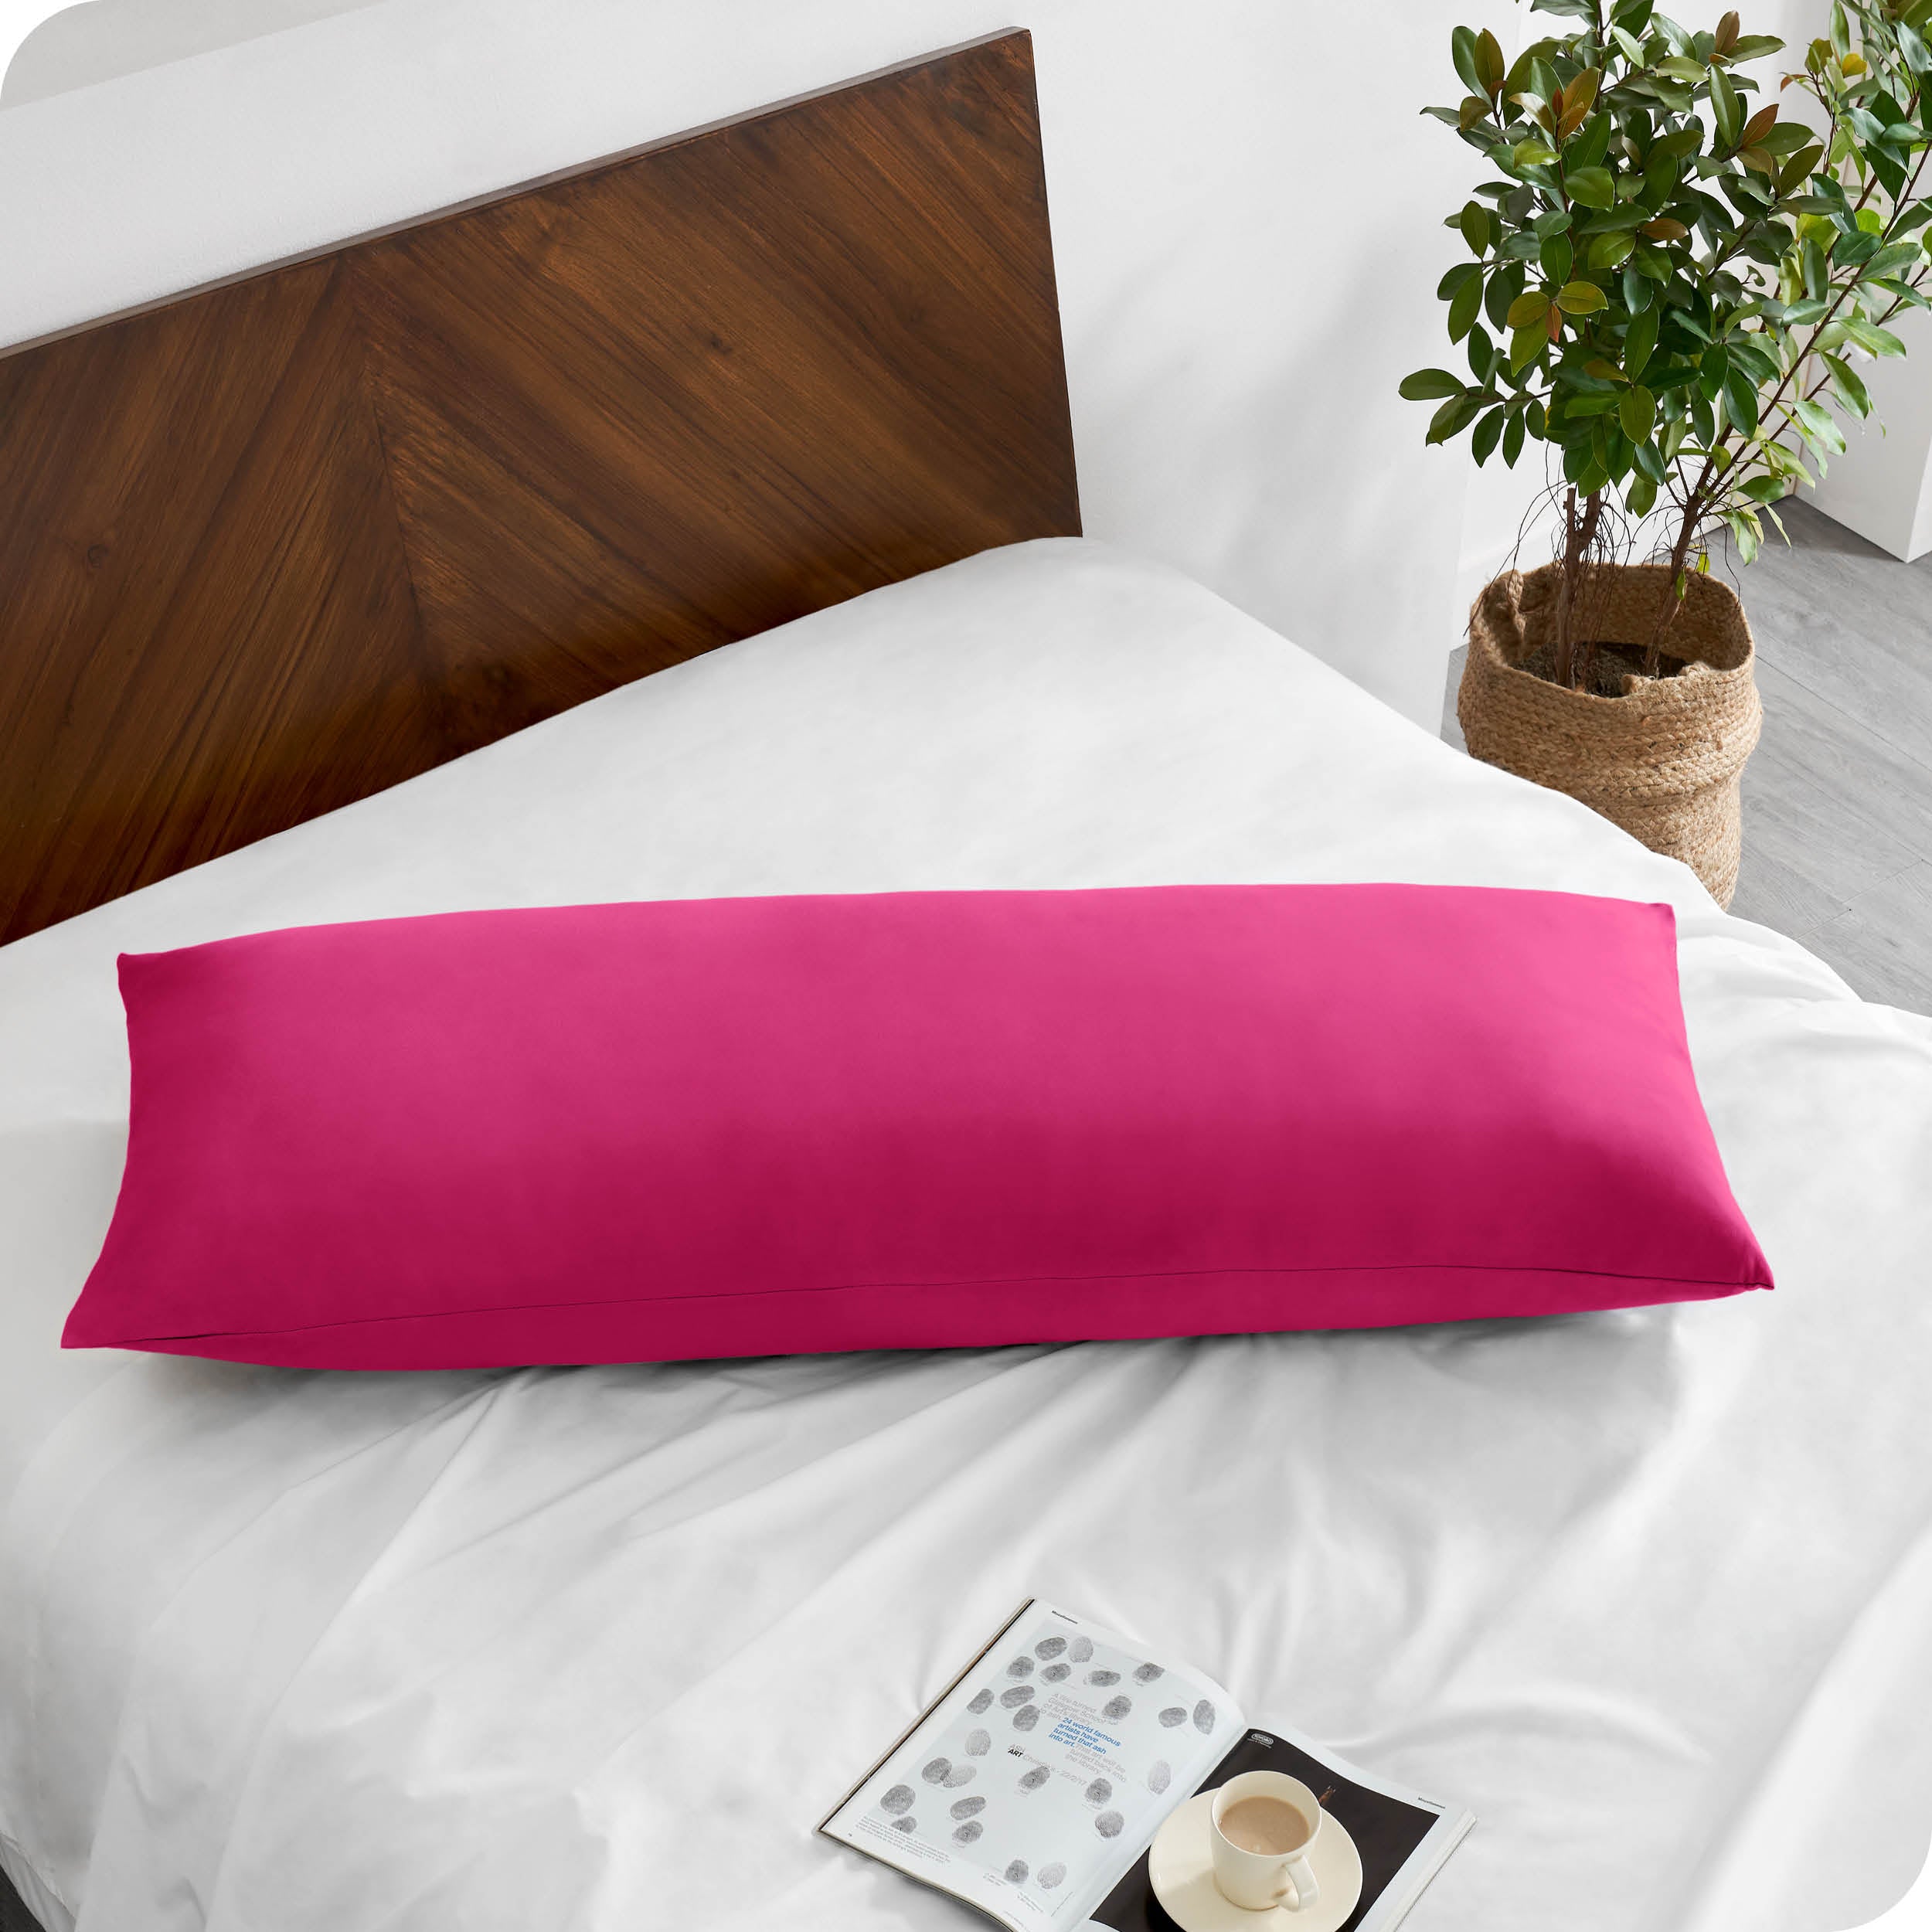 A body pillow cover on a pillow on a bed made with all white bedding